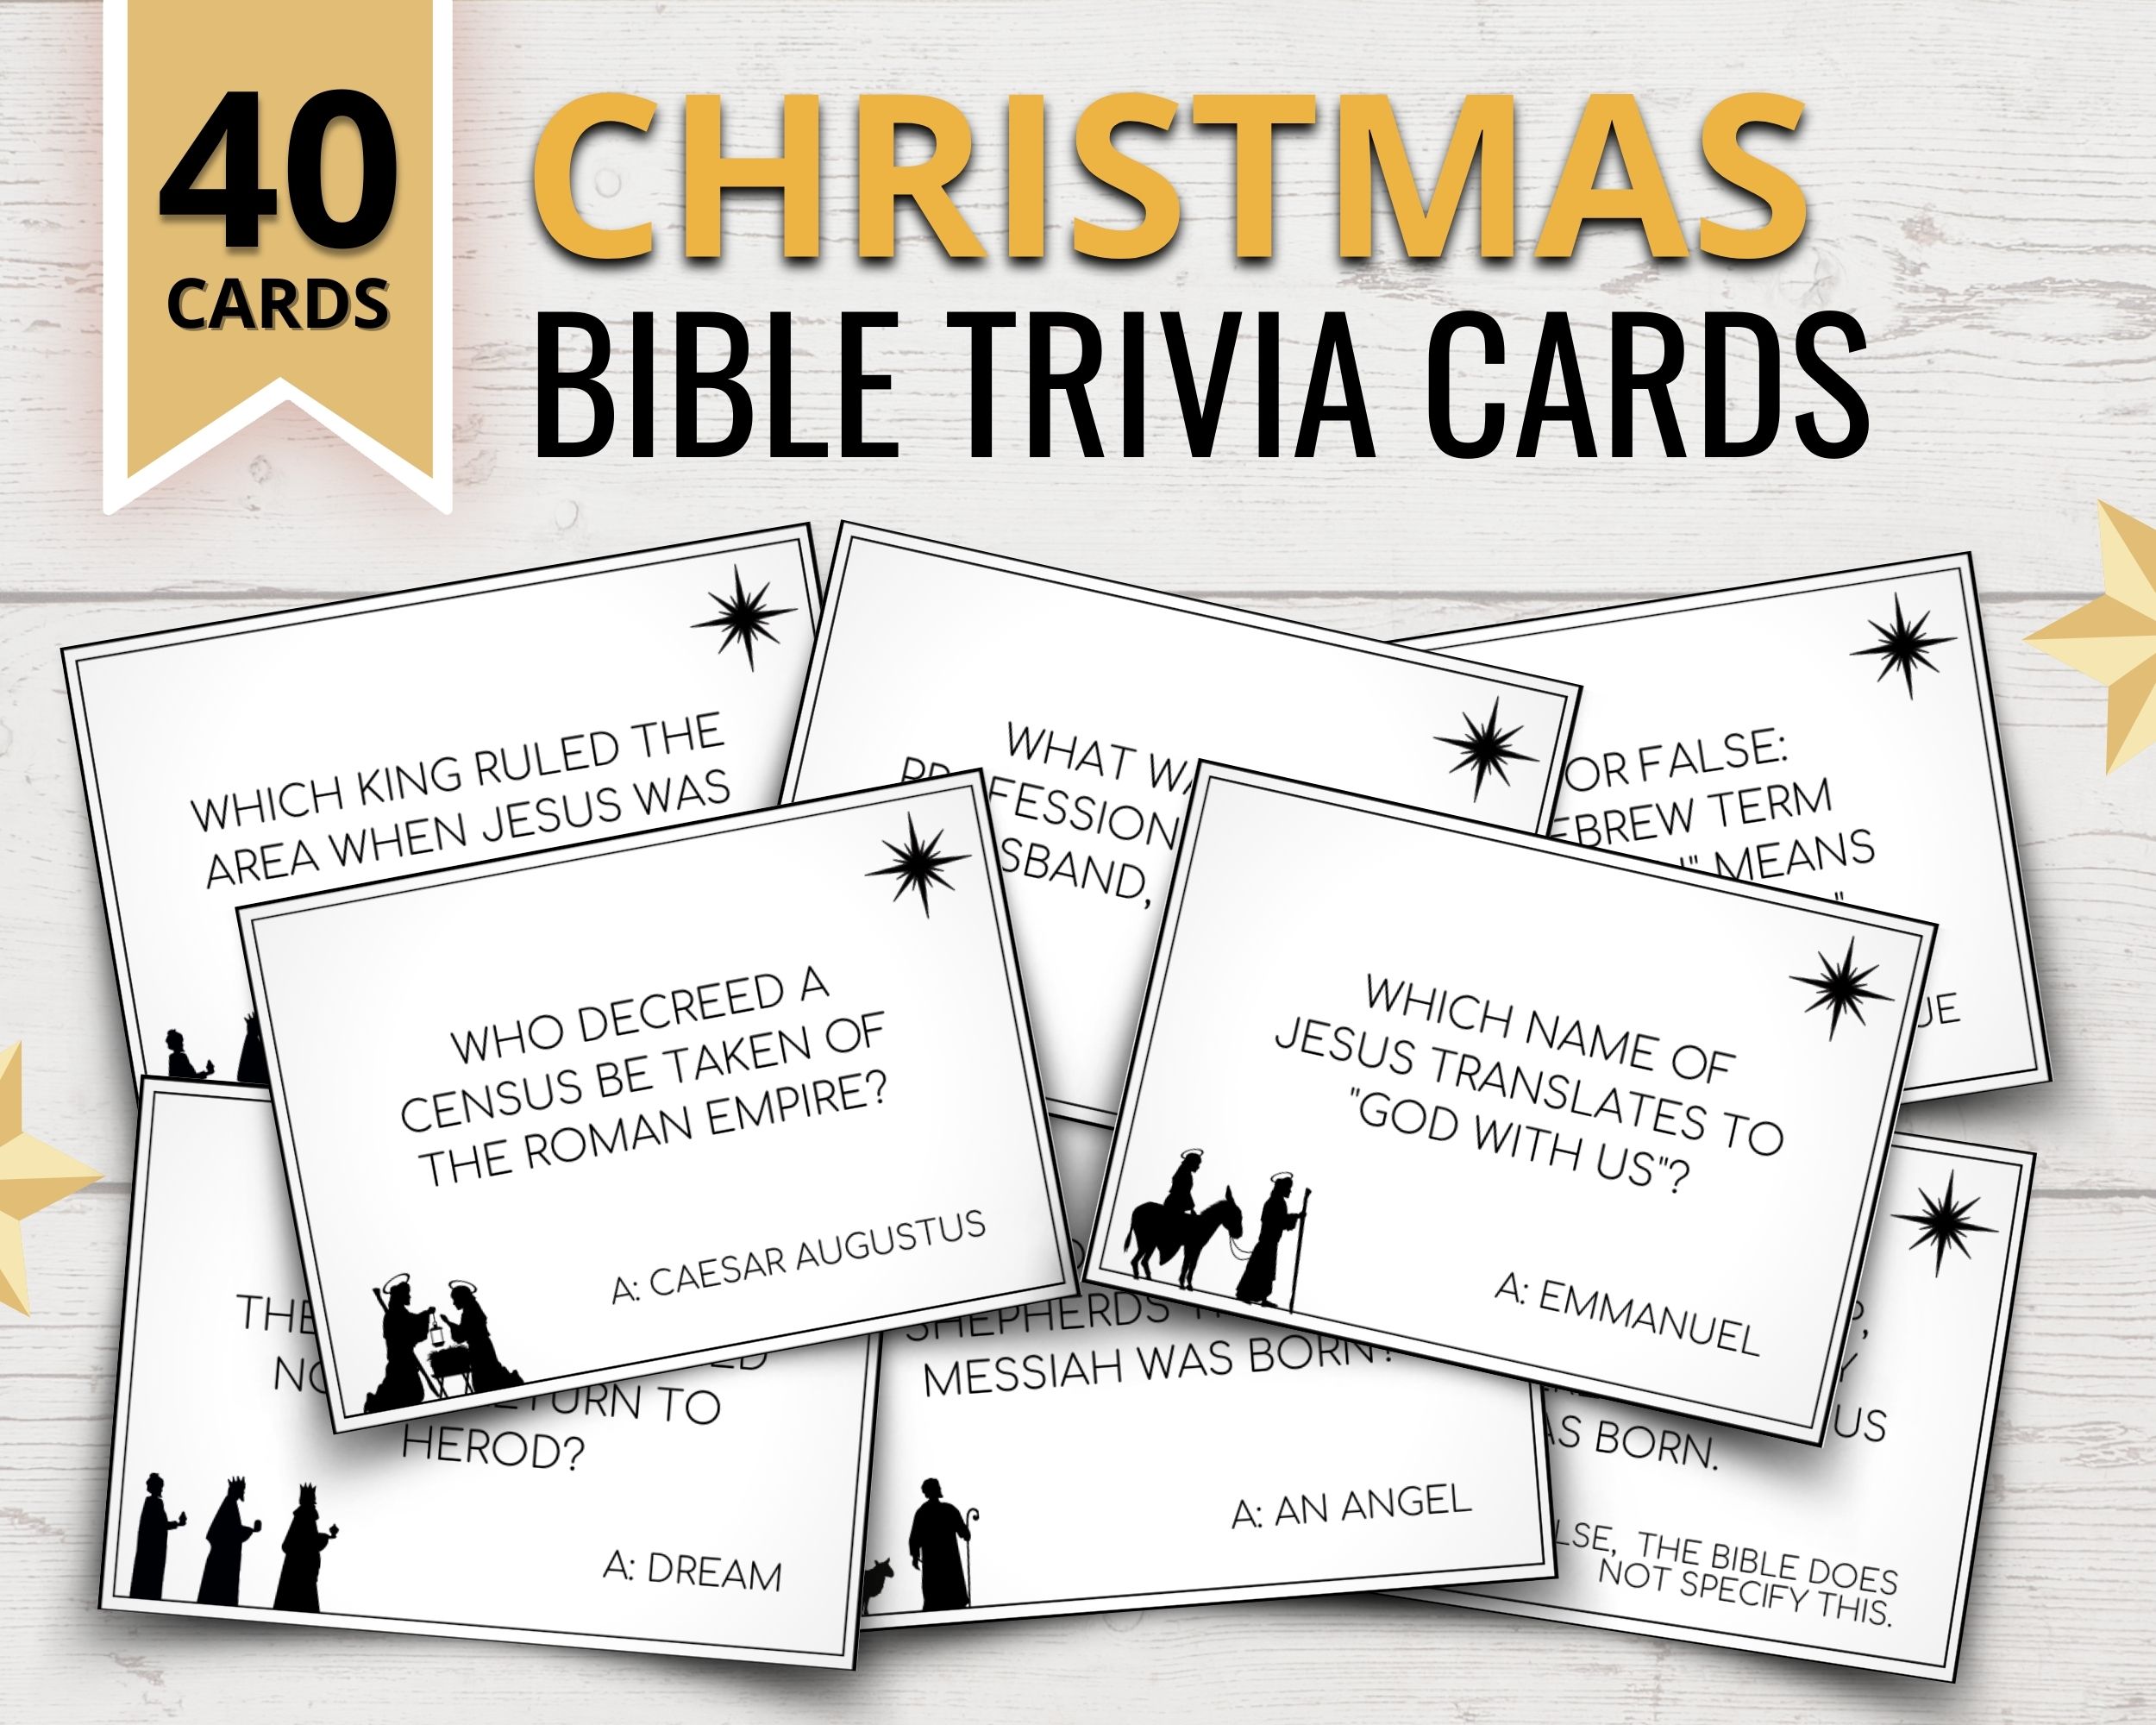 30 Christmas Bible Trivia Questions to Quiz Your Family